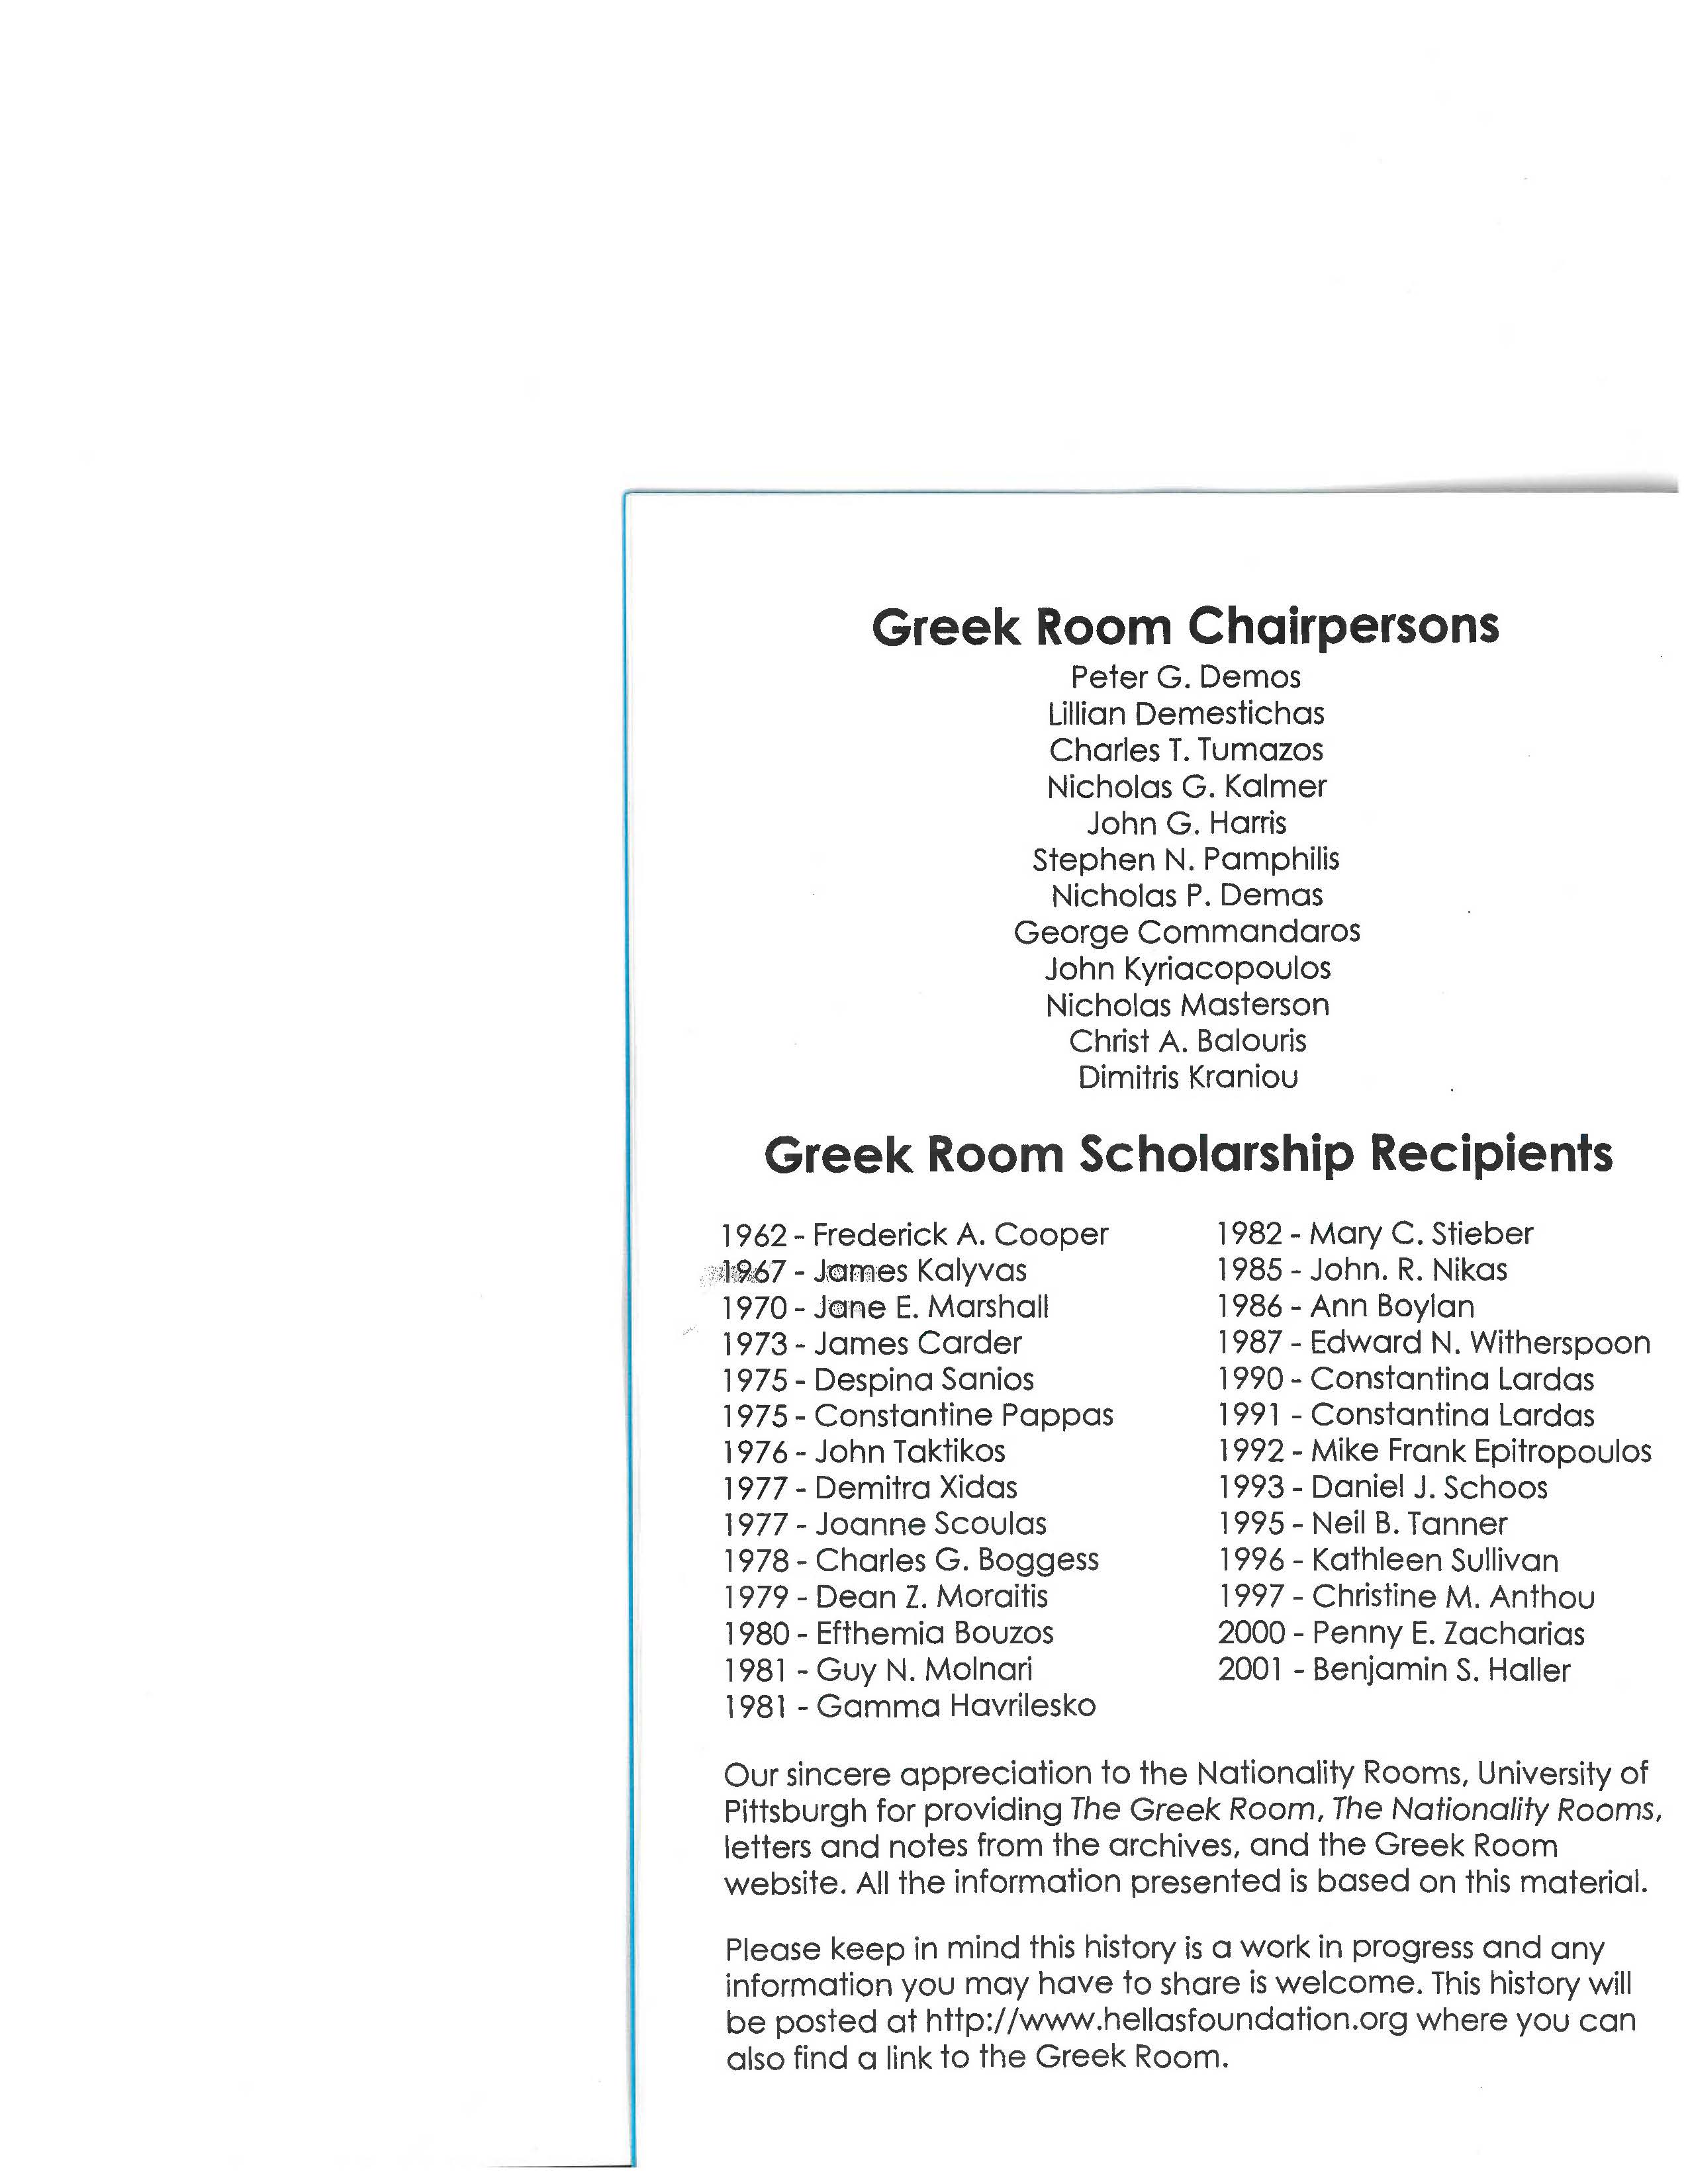 Greek Nationality Room 60th Anniversary (2021) Booklet_Page_13